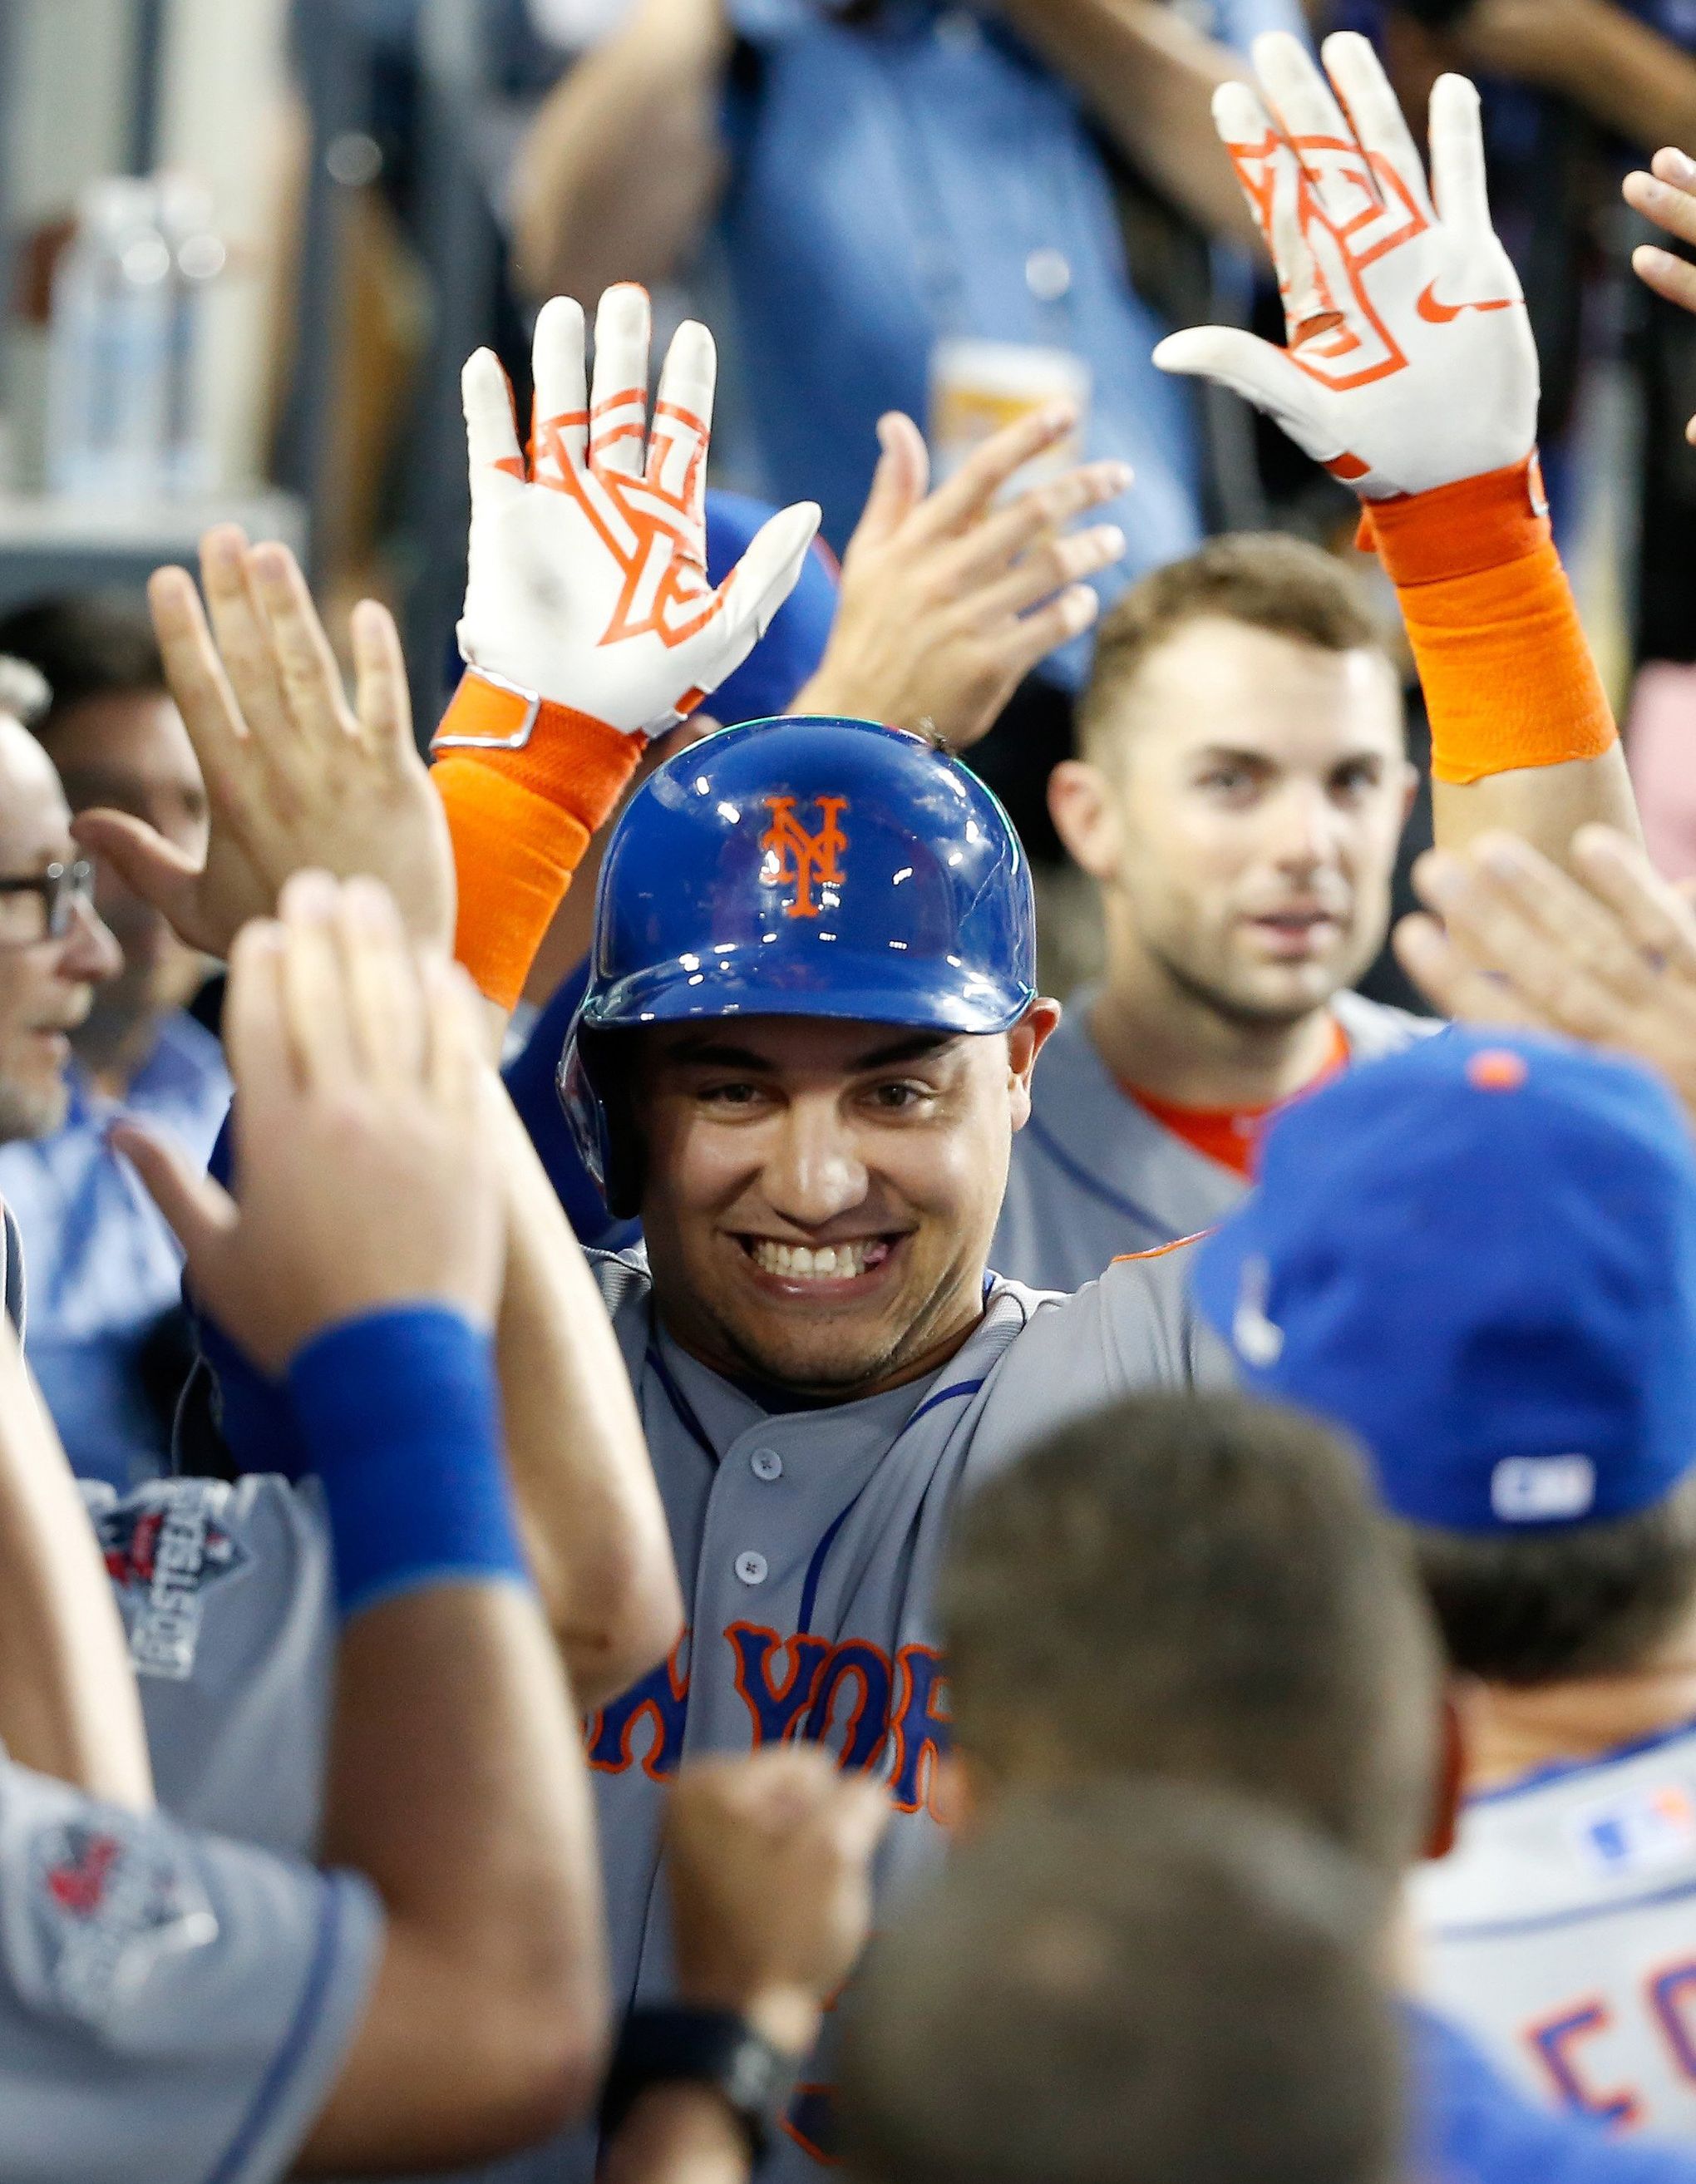 Redmond's Michael Conforto brings grassroots charm, and a powerful